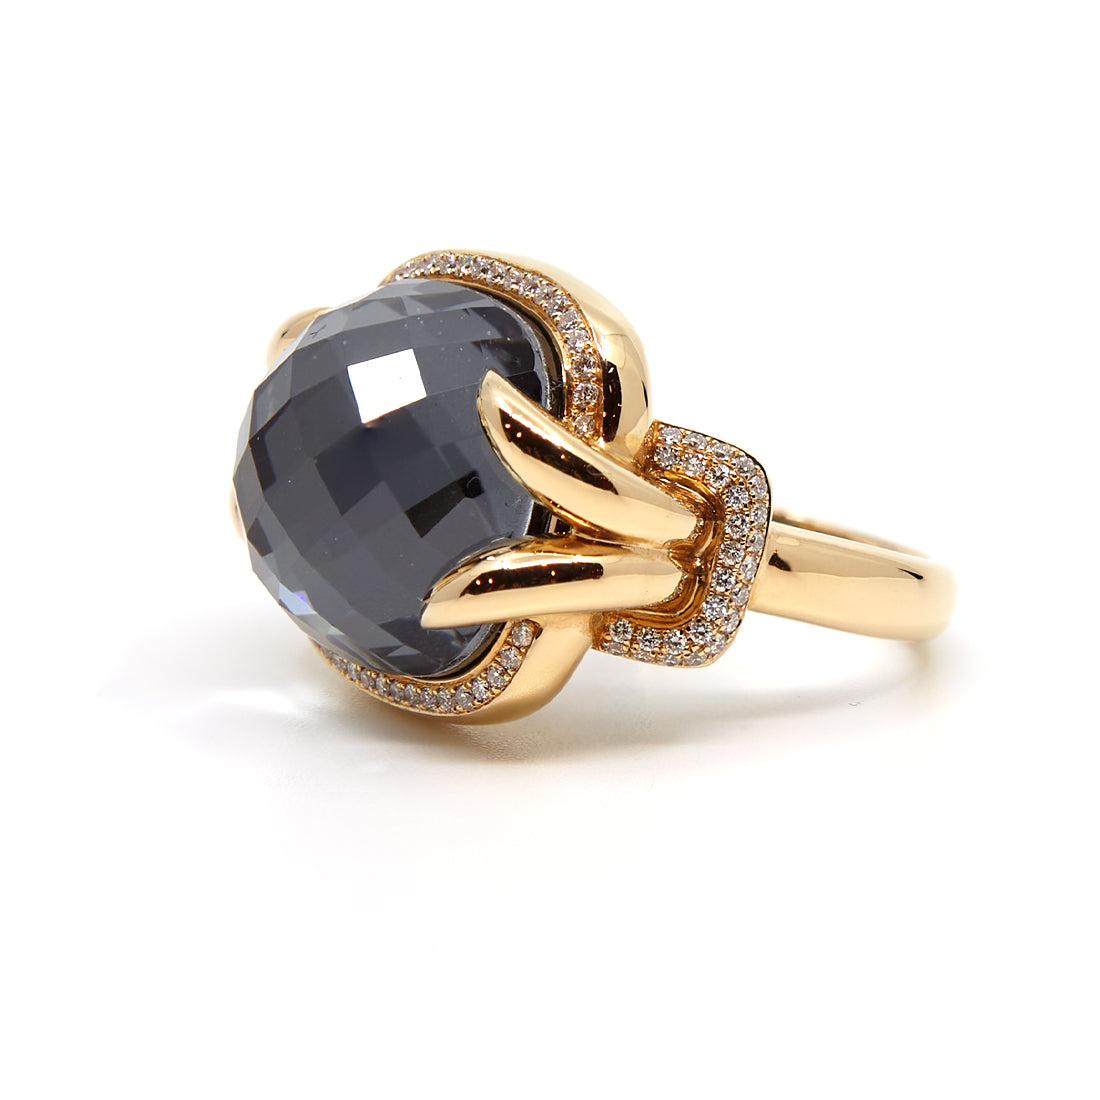 Rose gold ring with hematite and diamond